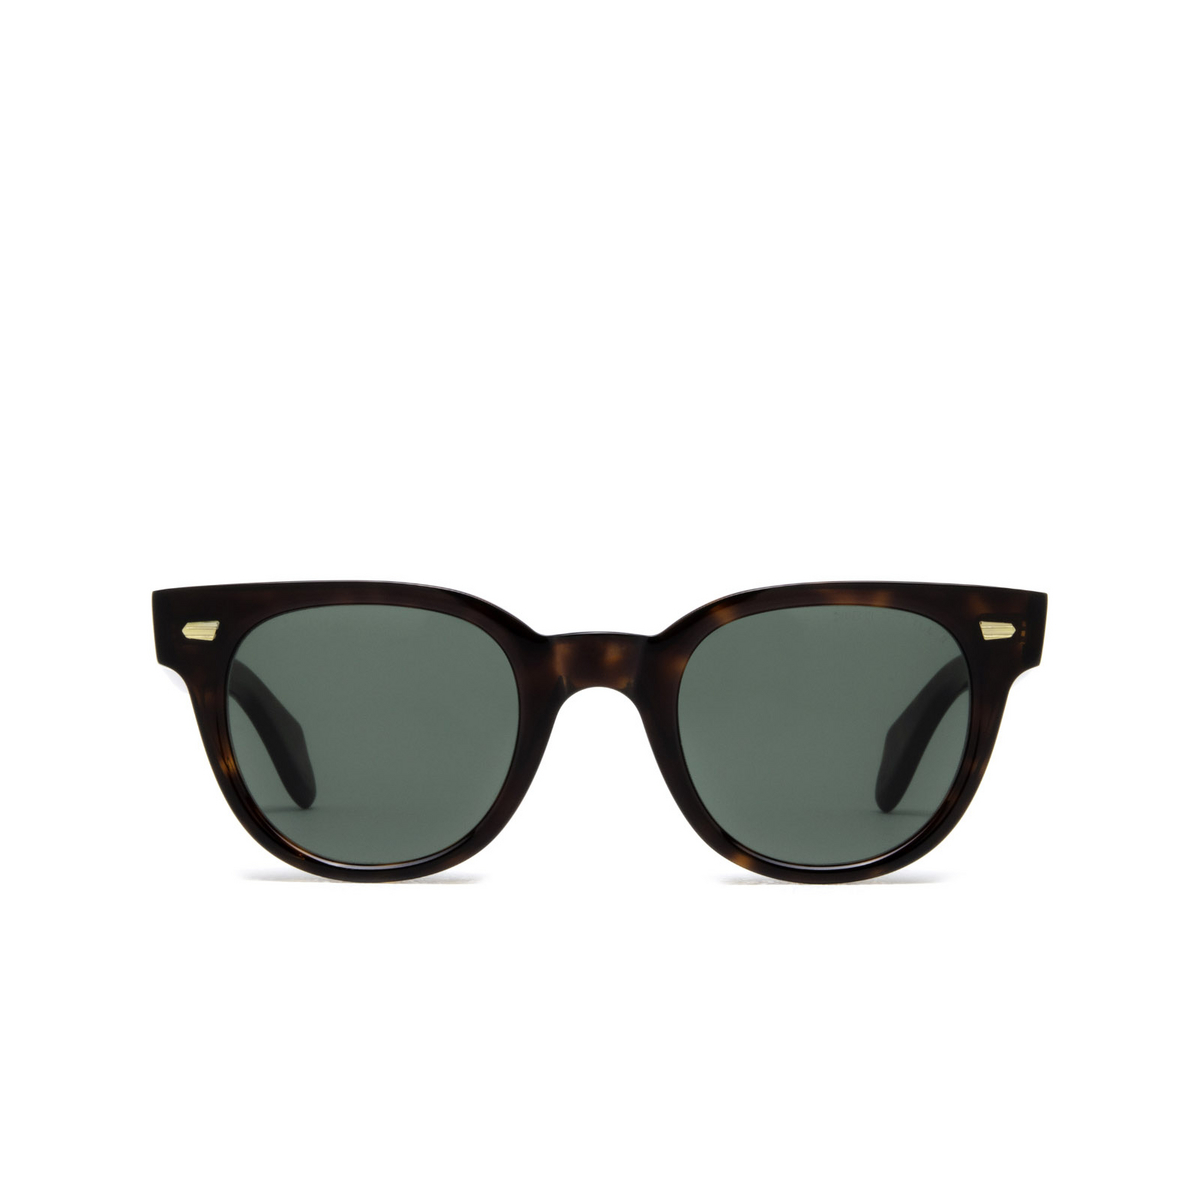 Cutler and Gross® Round Sunglasses: 1392 SUN color Dark Turtle 02 - front view.